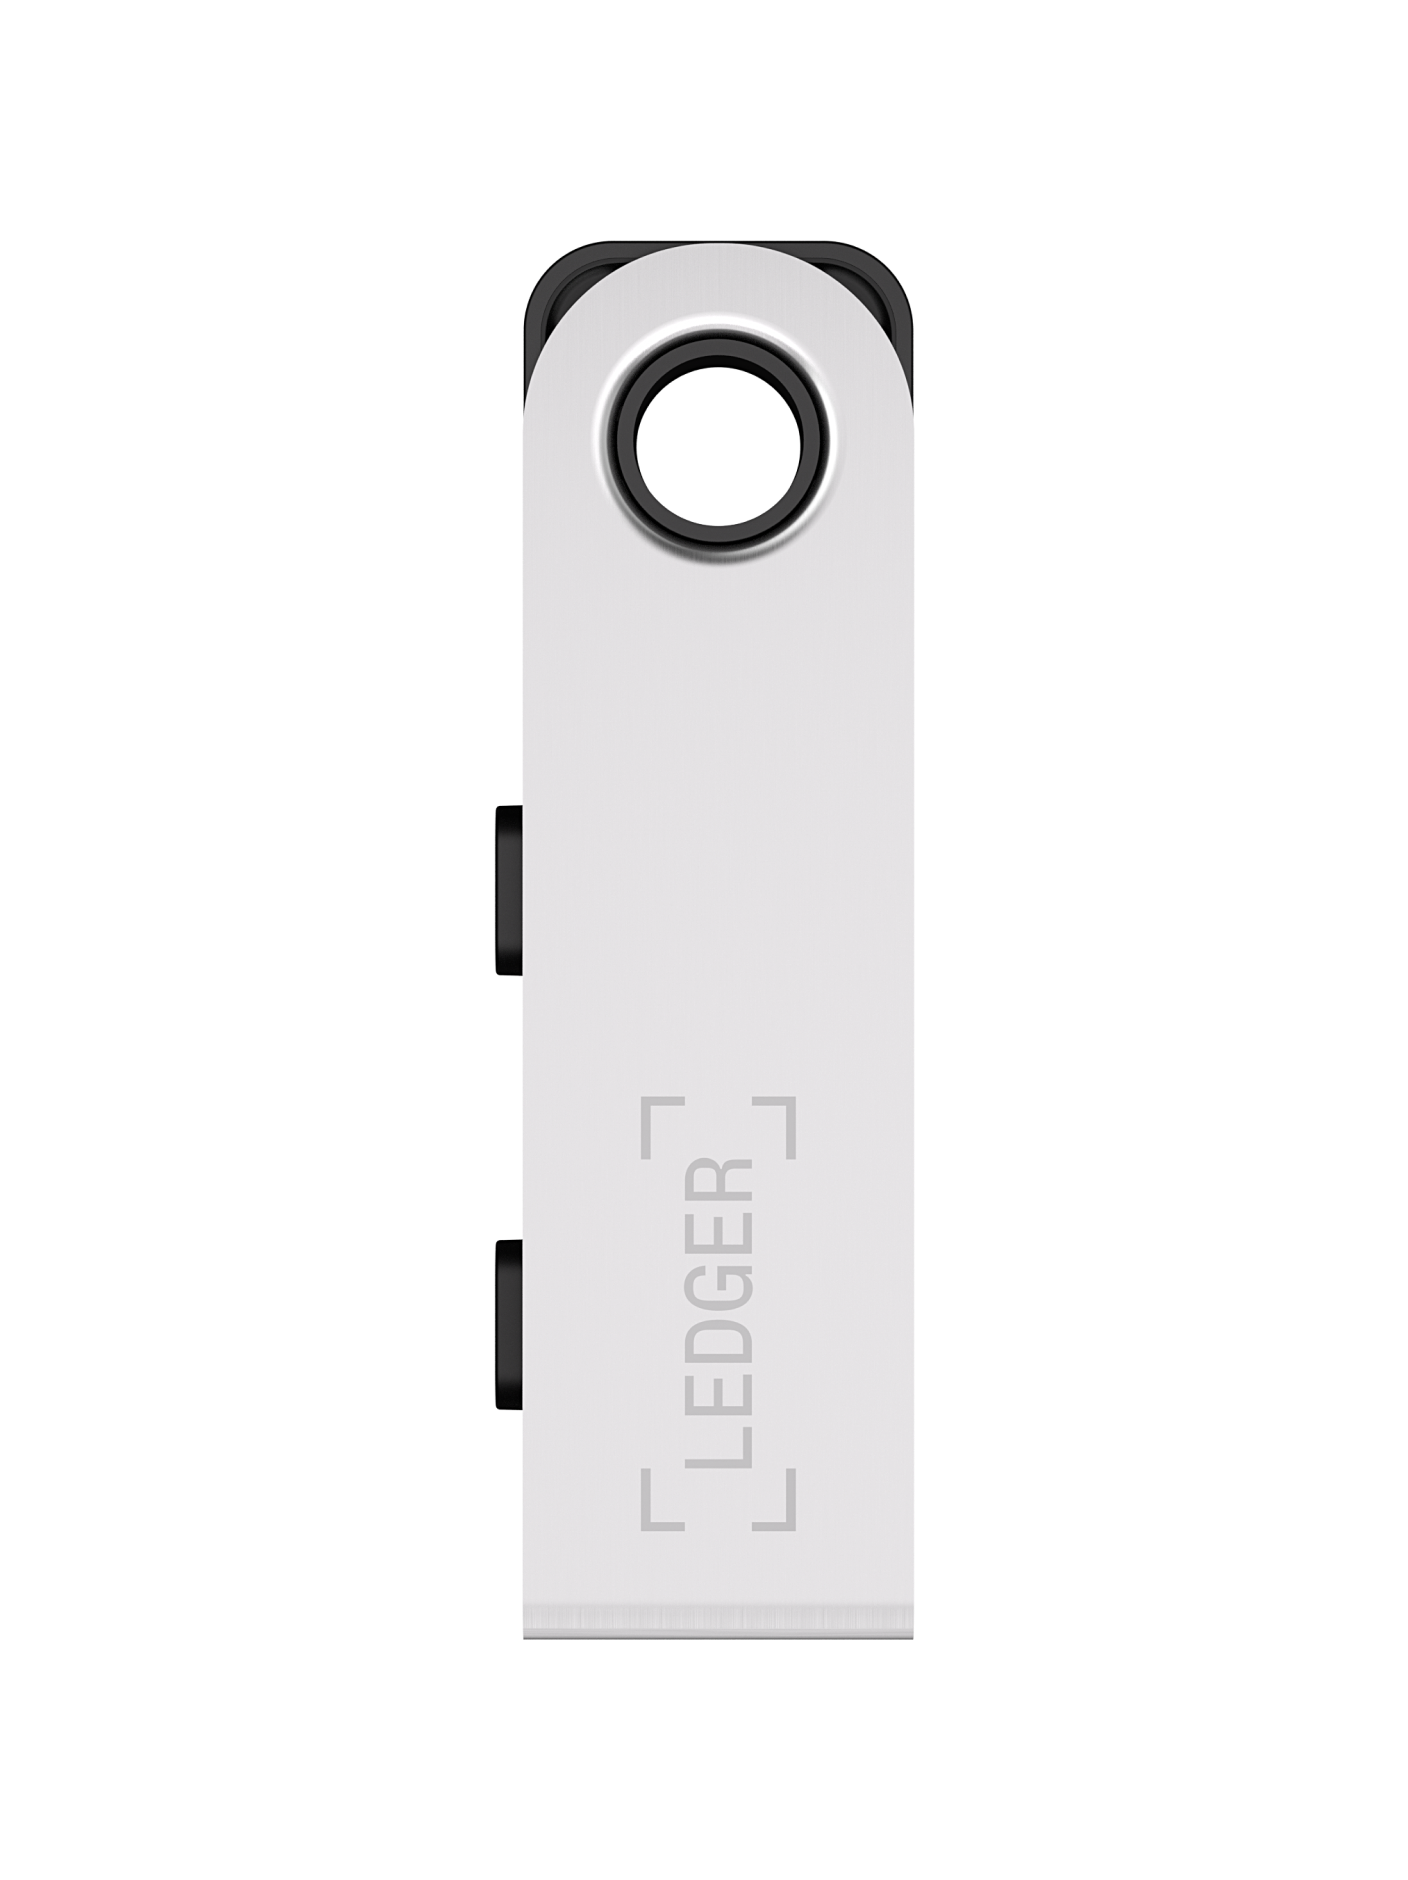 Buy a Ledger Nano S Plus Hardware Wallet - In Stock - Ships Today FREE – The Crypto Merchant